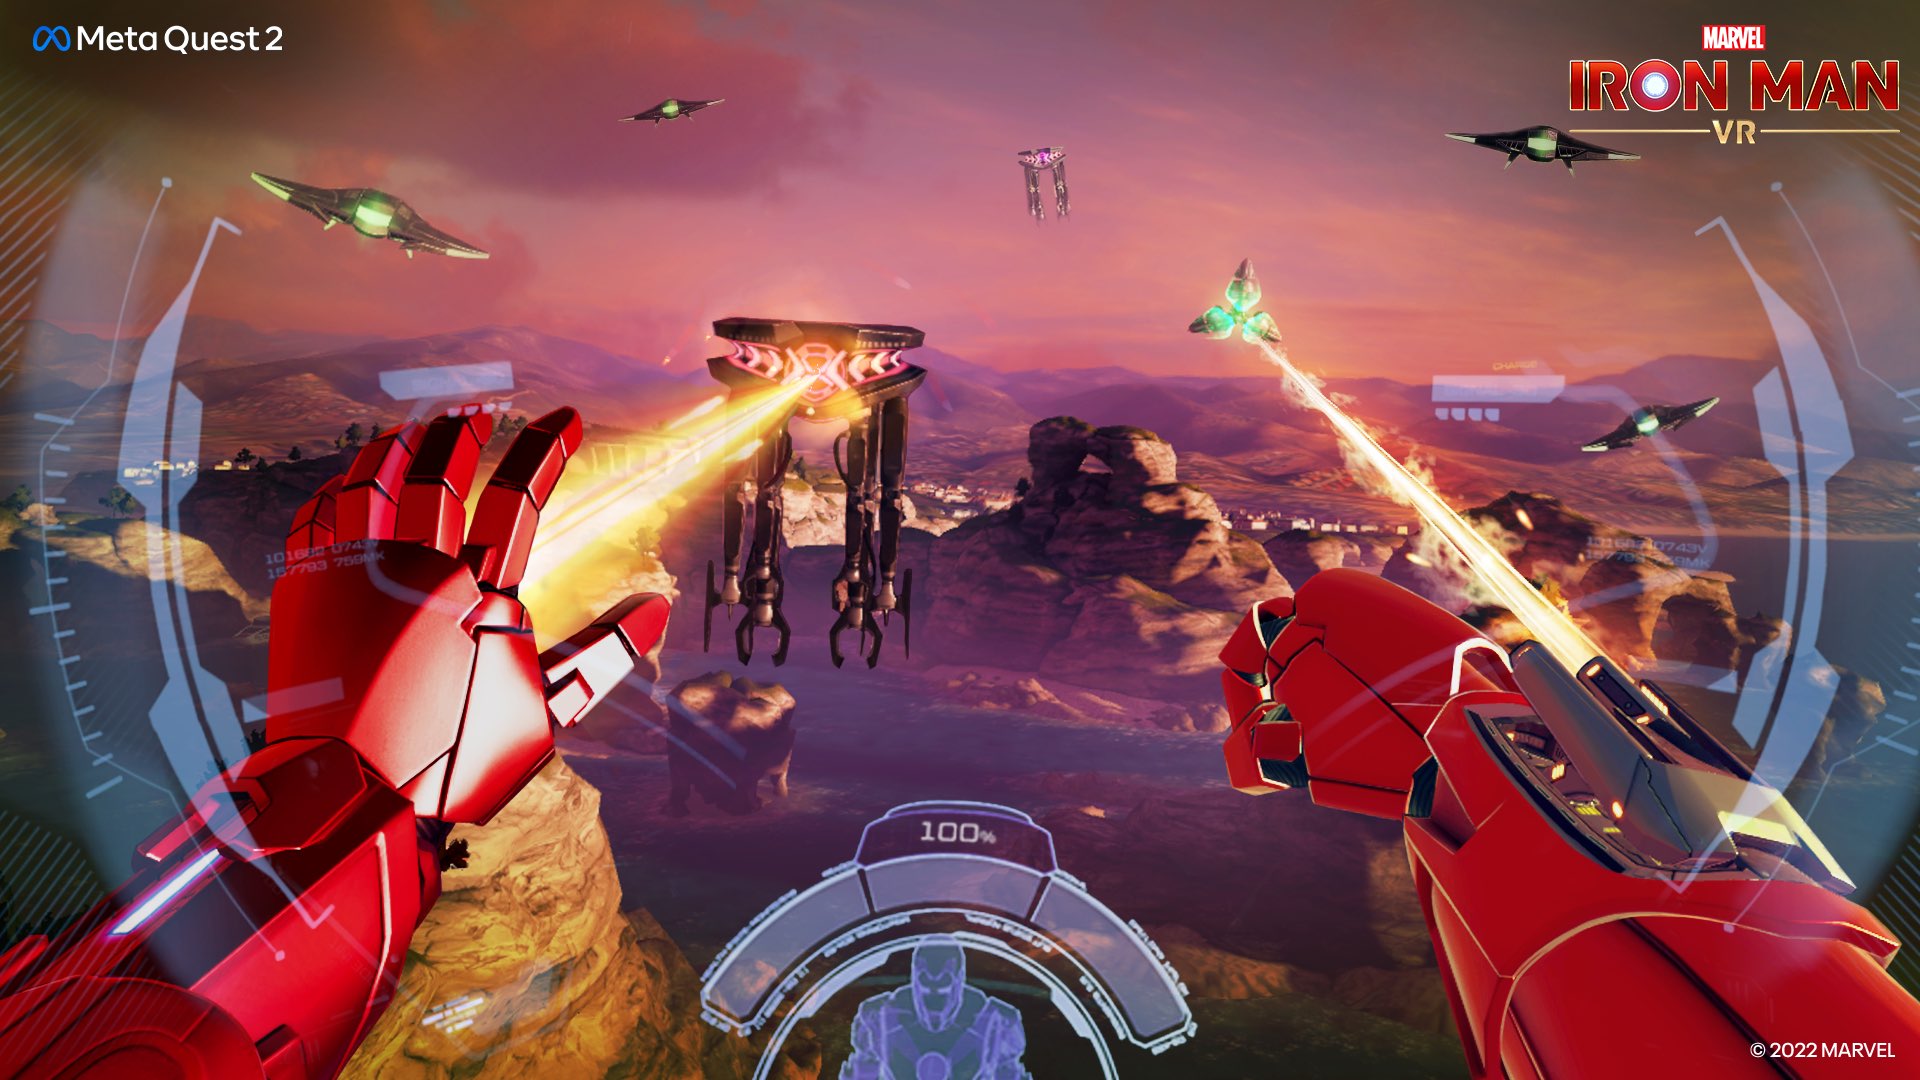 Marvel Iron Man VR Meta Quest 2 screenshot featuring drones attacking